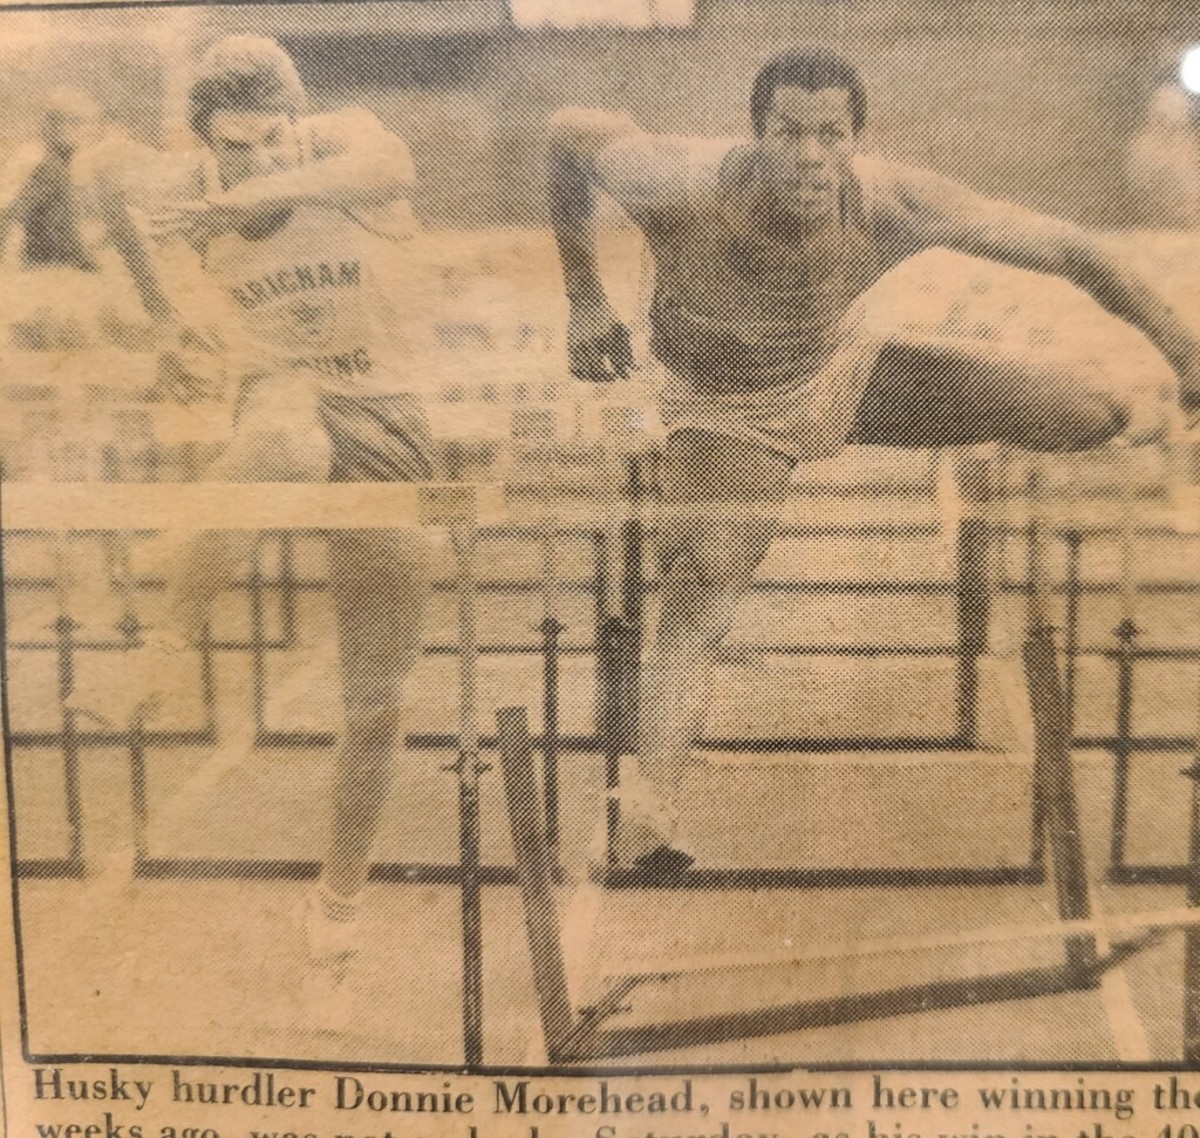 Donnie Morehead was a talented UW hurdler.